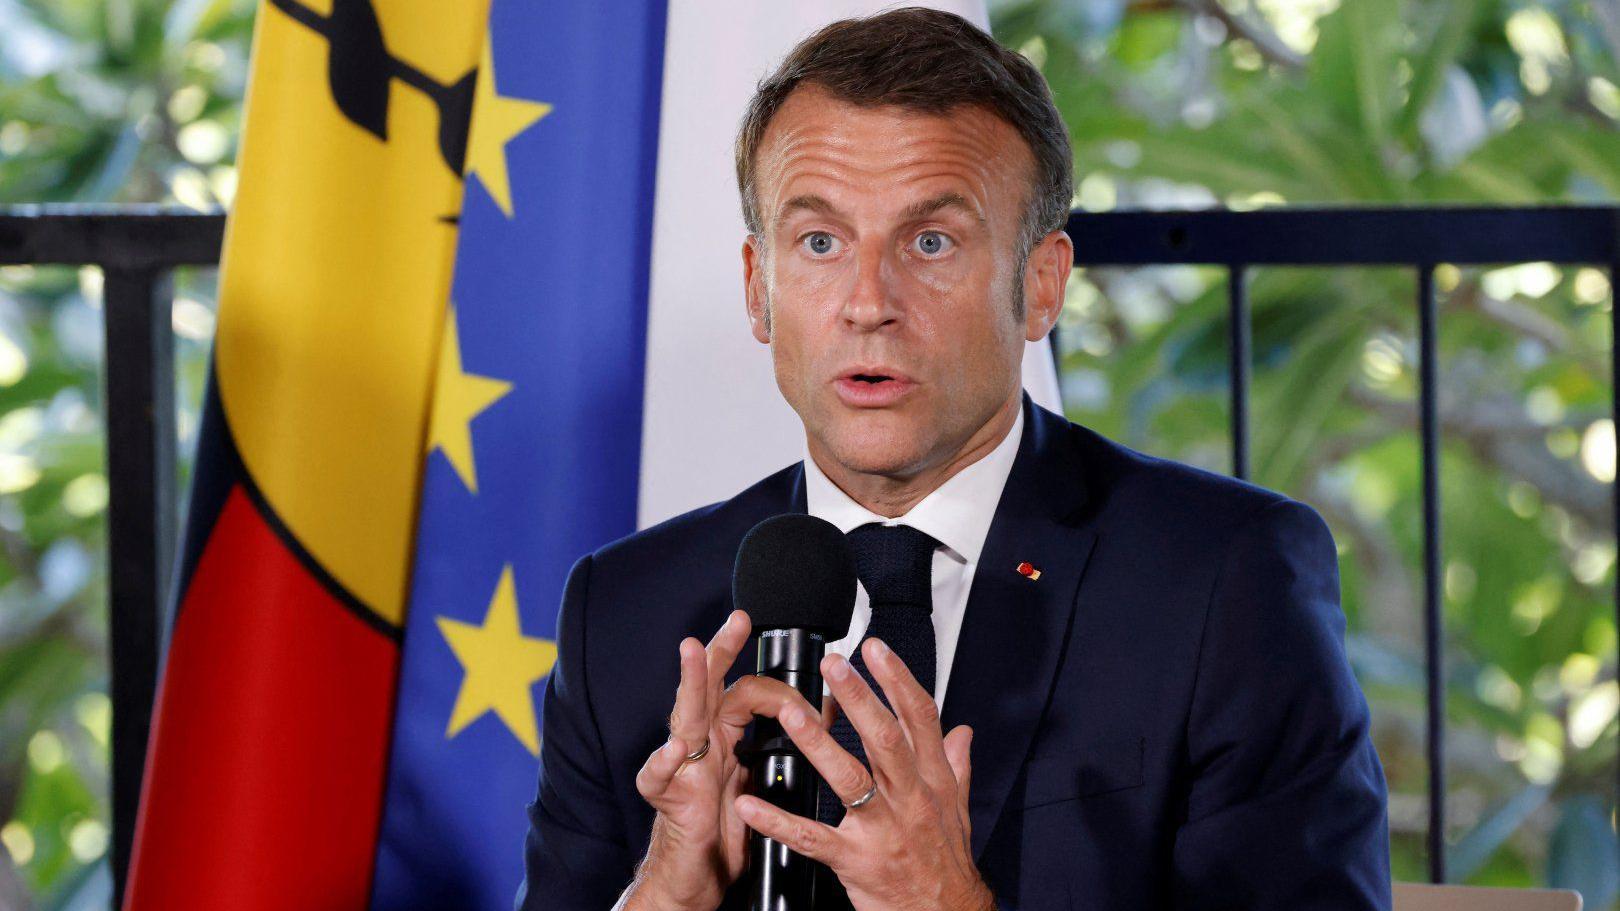 French police to stay in New Caledonia, Macron says